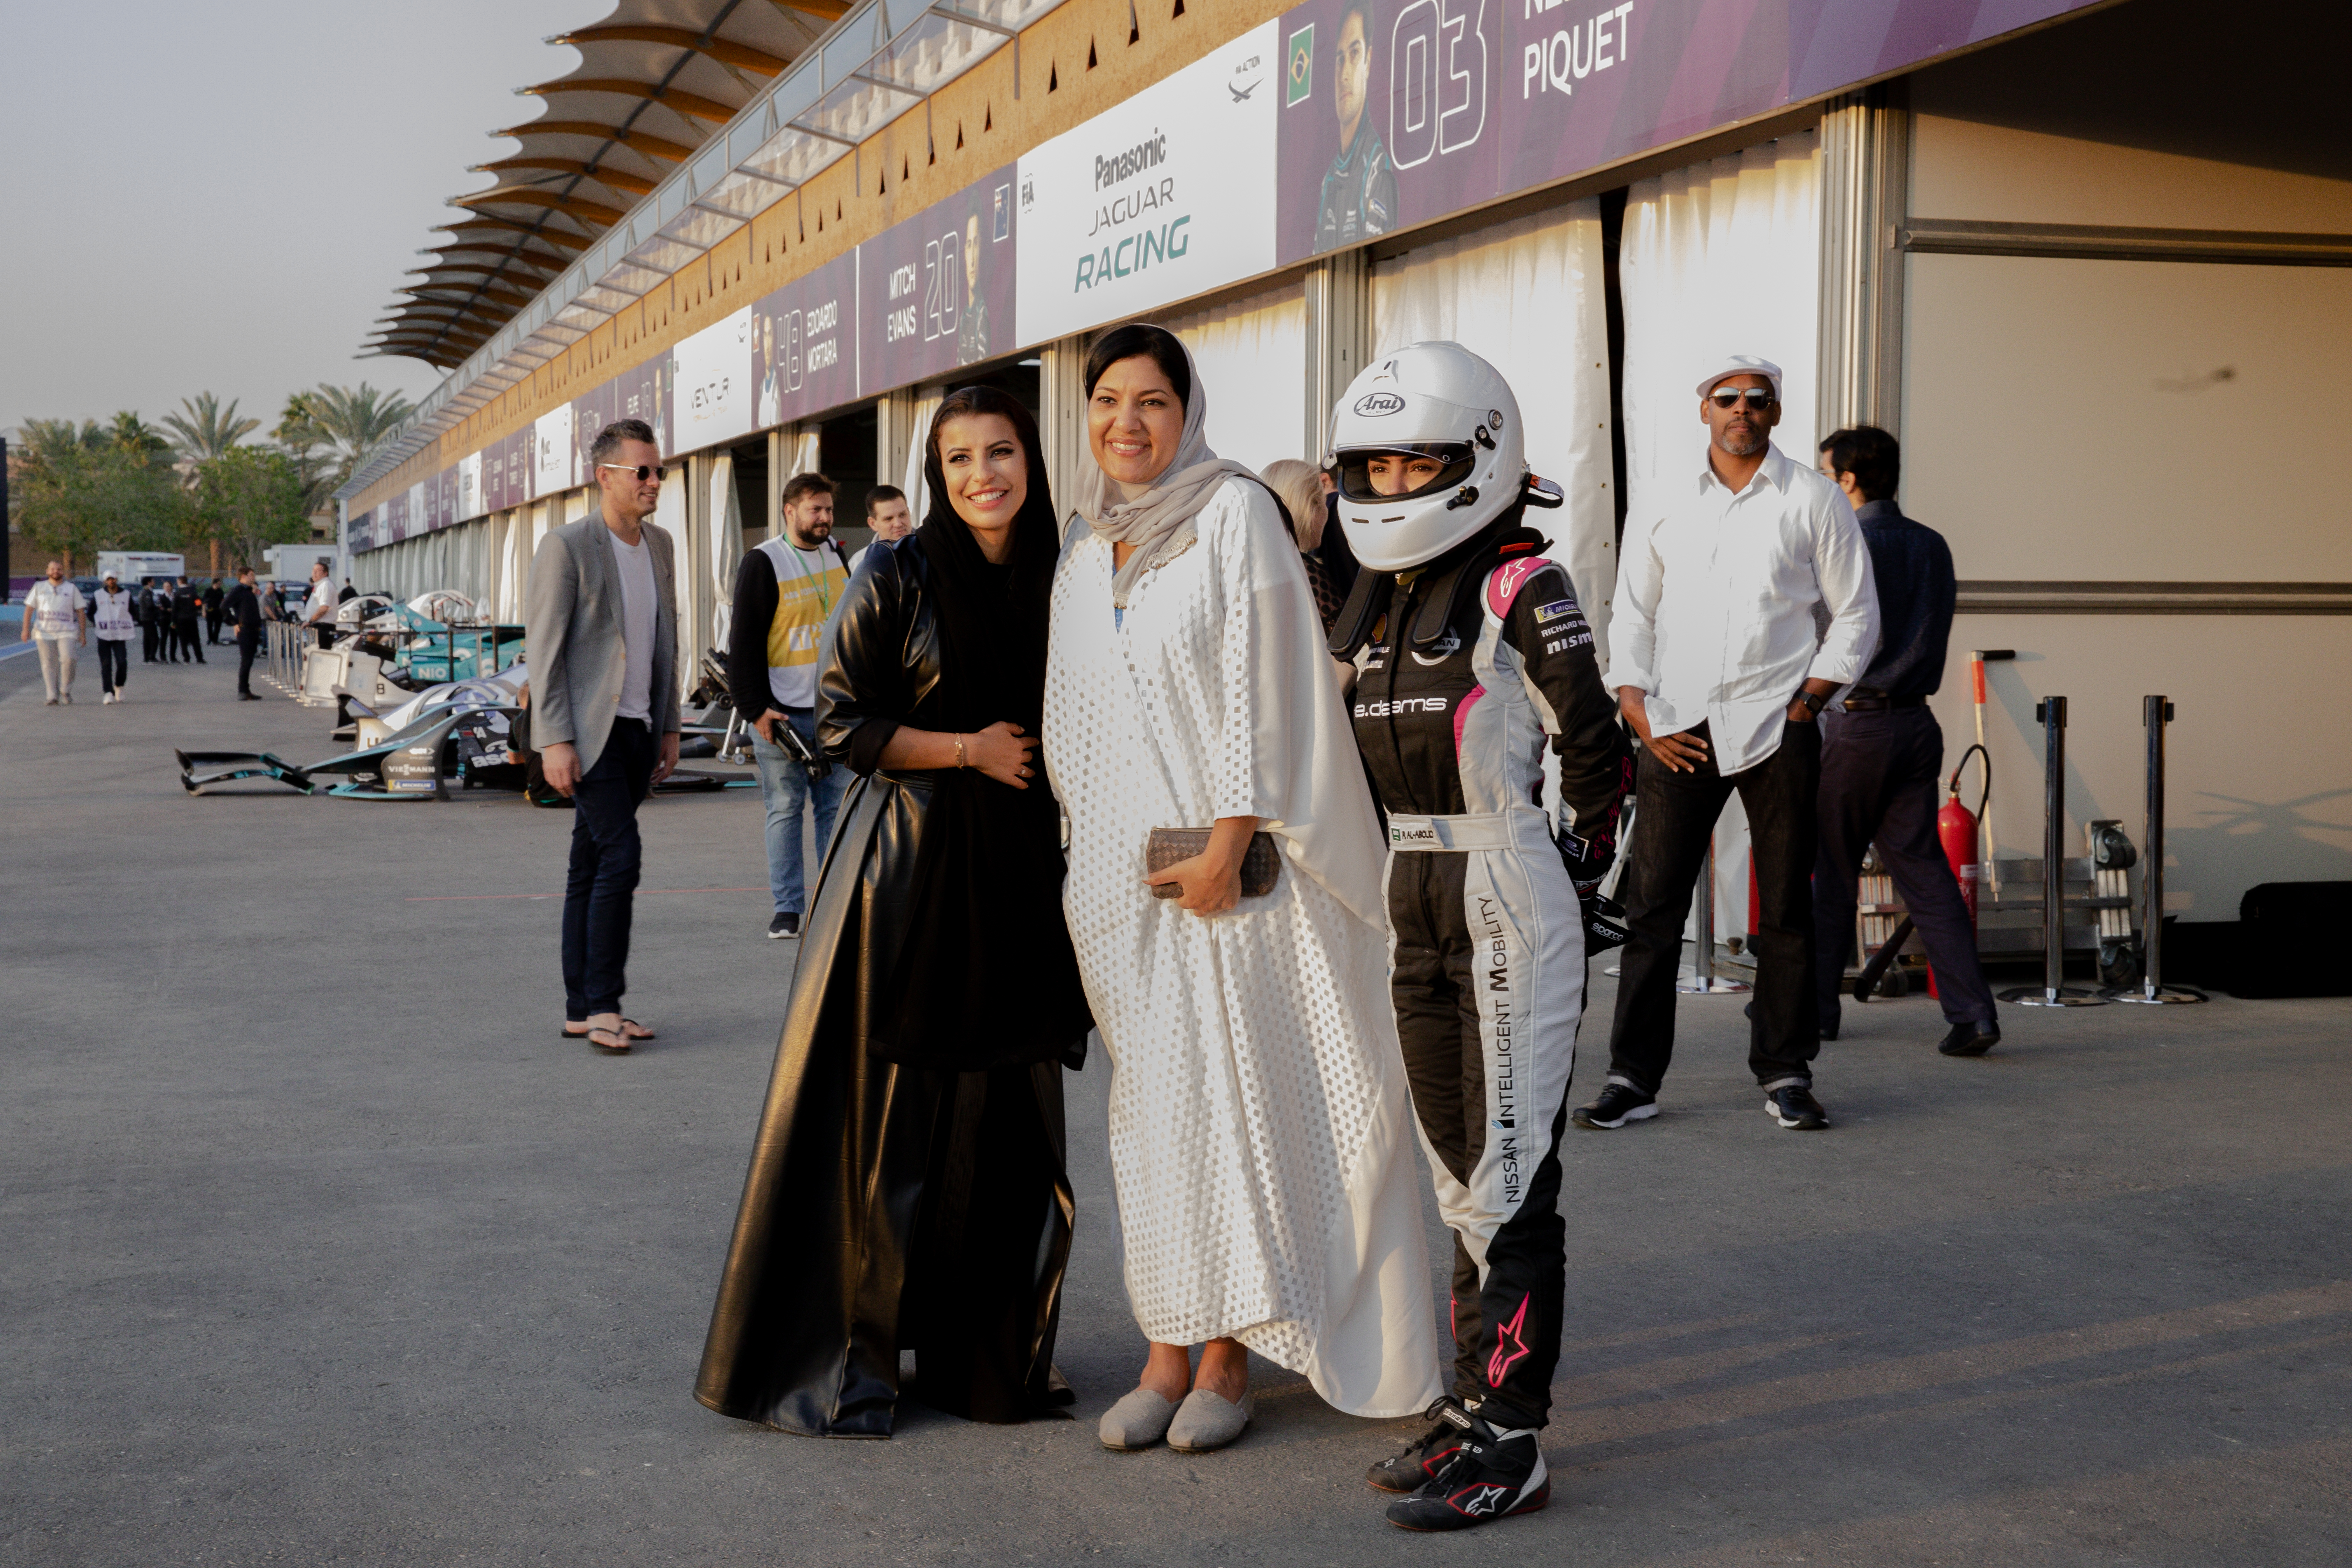 Reem Al-Aboud (right) with HRH Princess Reema Bint Bandar Al Saud, the deputy of development and planning for the General Sports Authority (center) during the Ad Diriyah E-Prix in Riyadh (Photo Courtesy CIC)